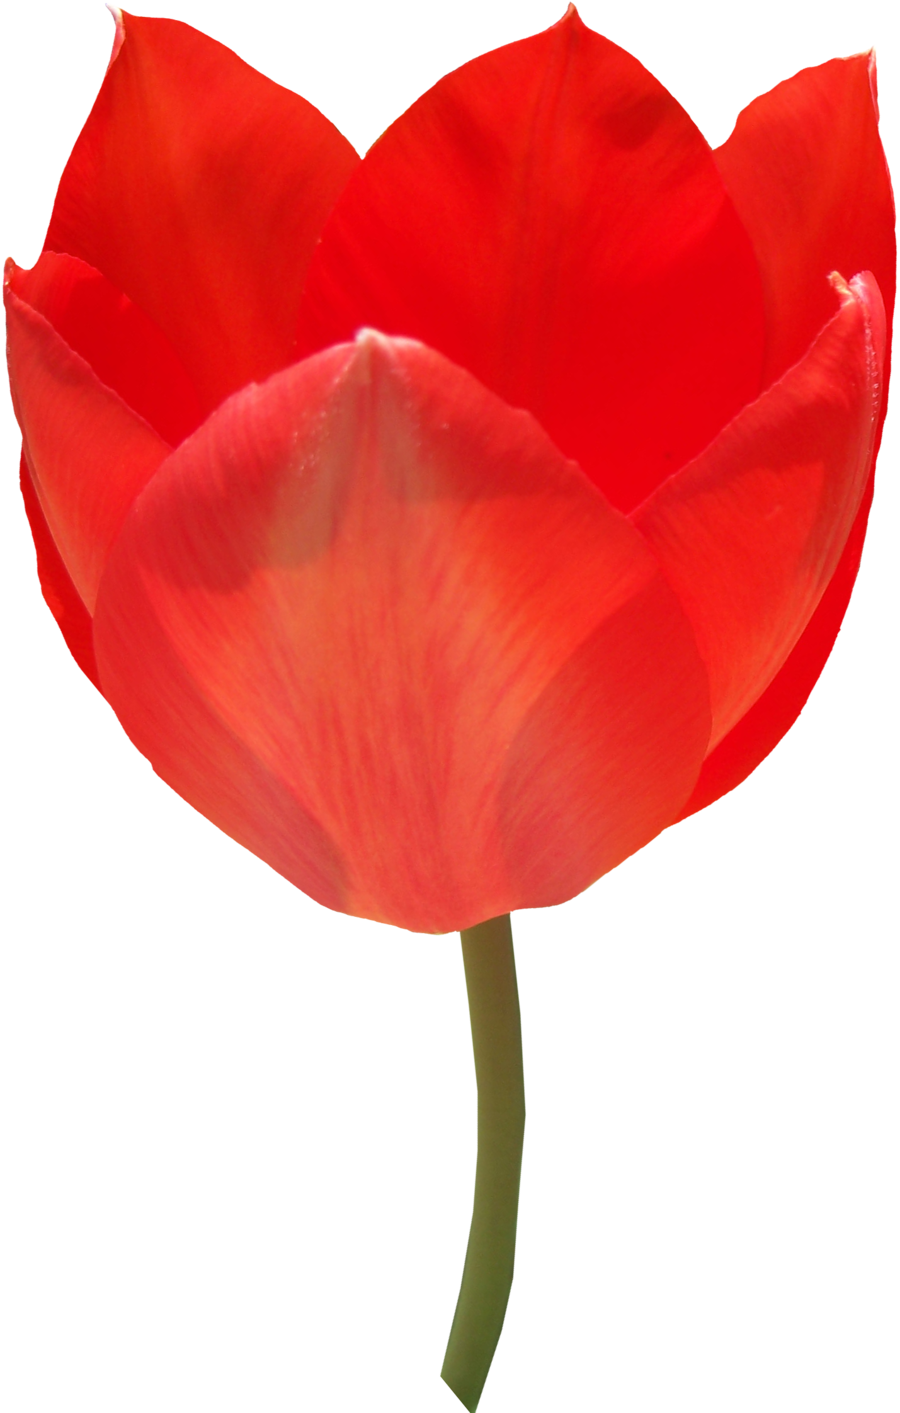 Vibrant Red Tulip Single Bloom PNG image